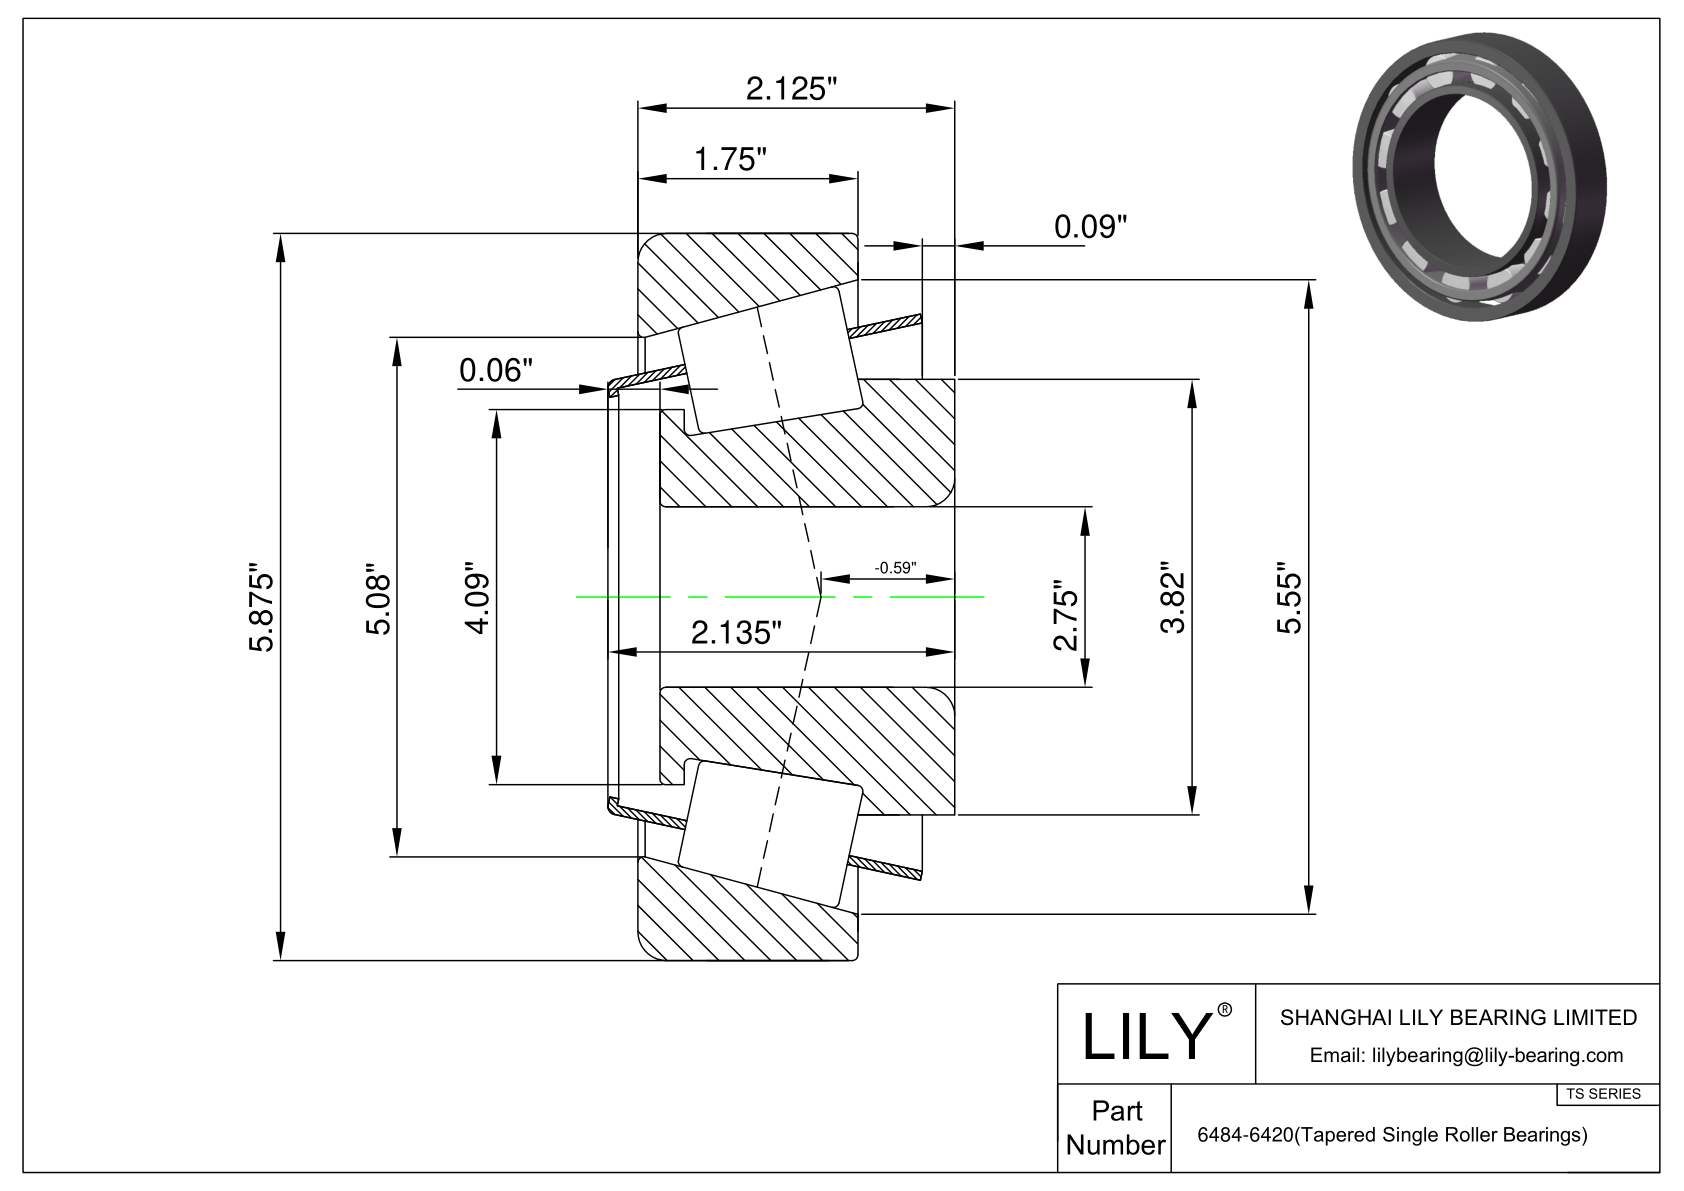 6484-6420 TS (Tapered Single Roller Bearings) (Imperial) cad drawing